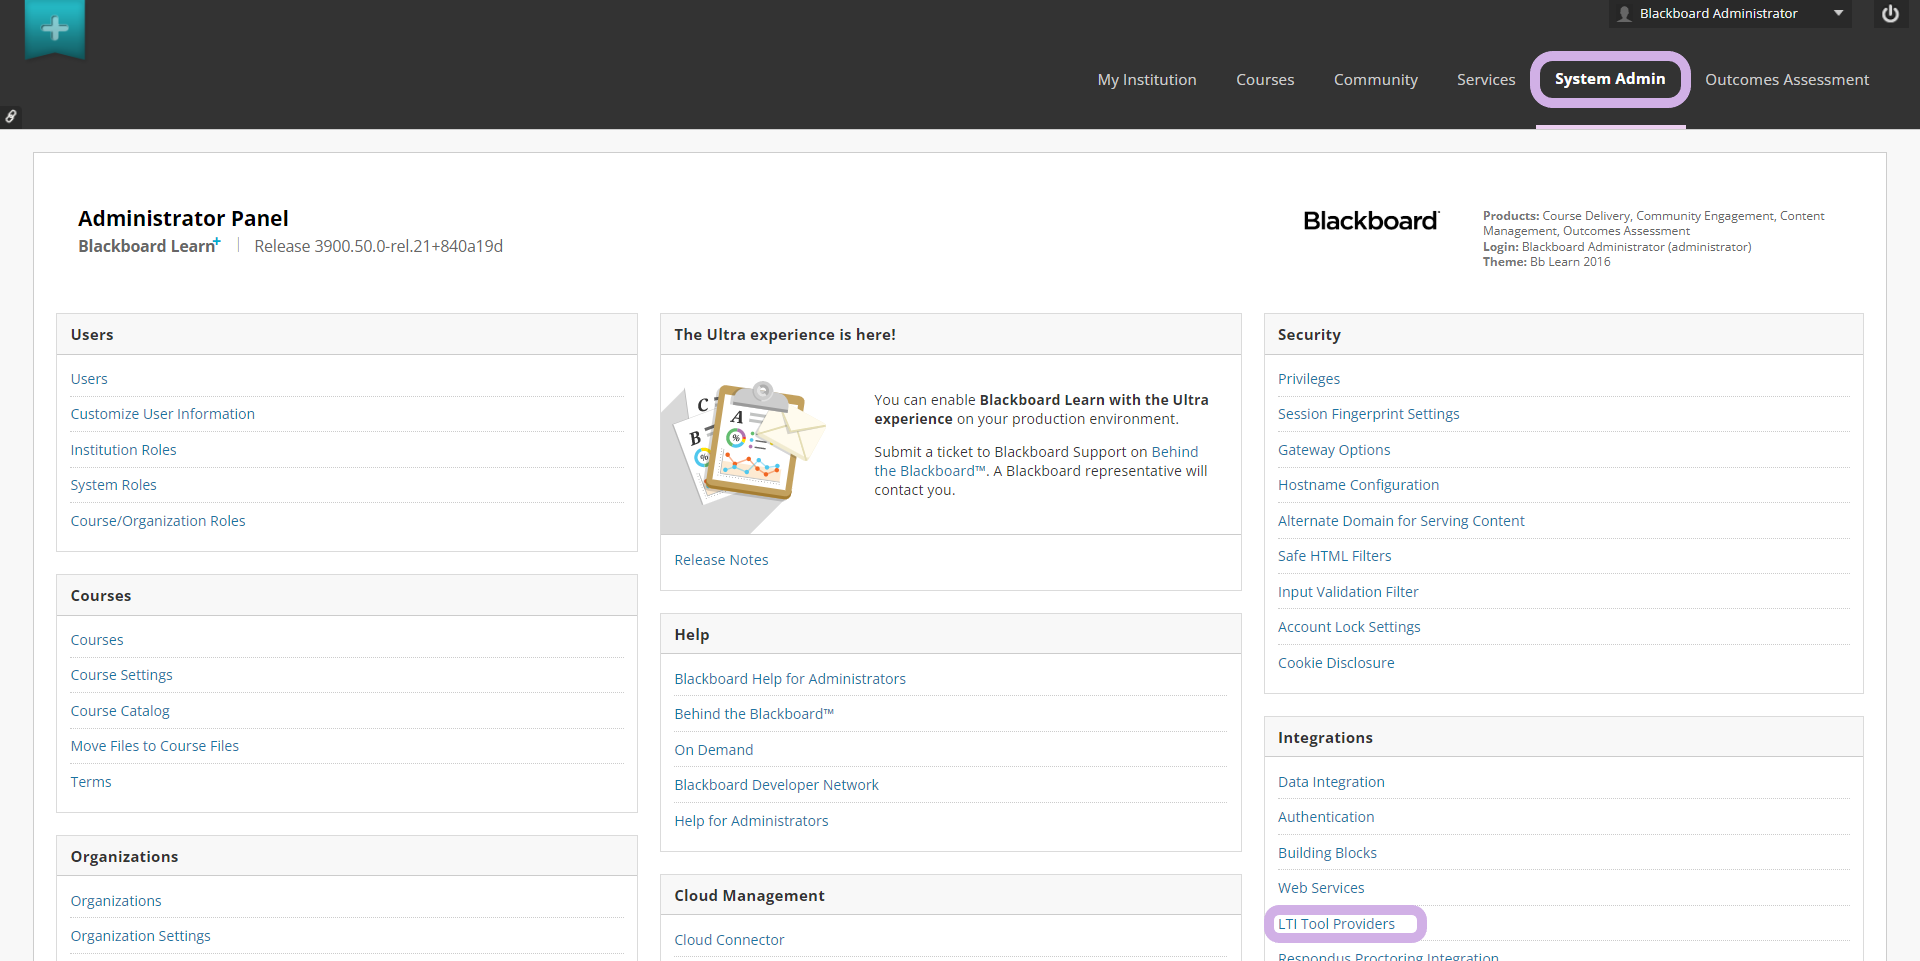 System Admin page for Blackboard Learn. System Admin is highlighted along with LTI Tool Provider.